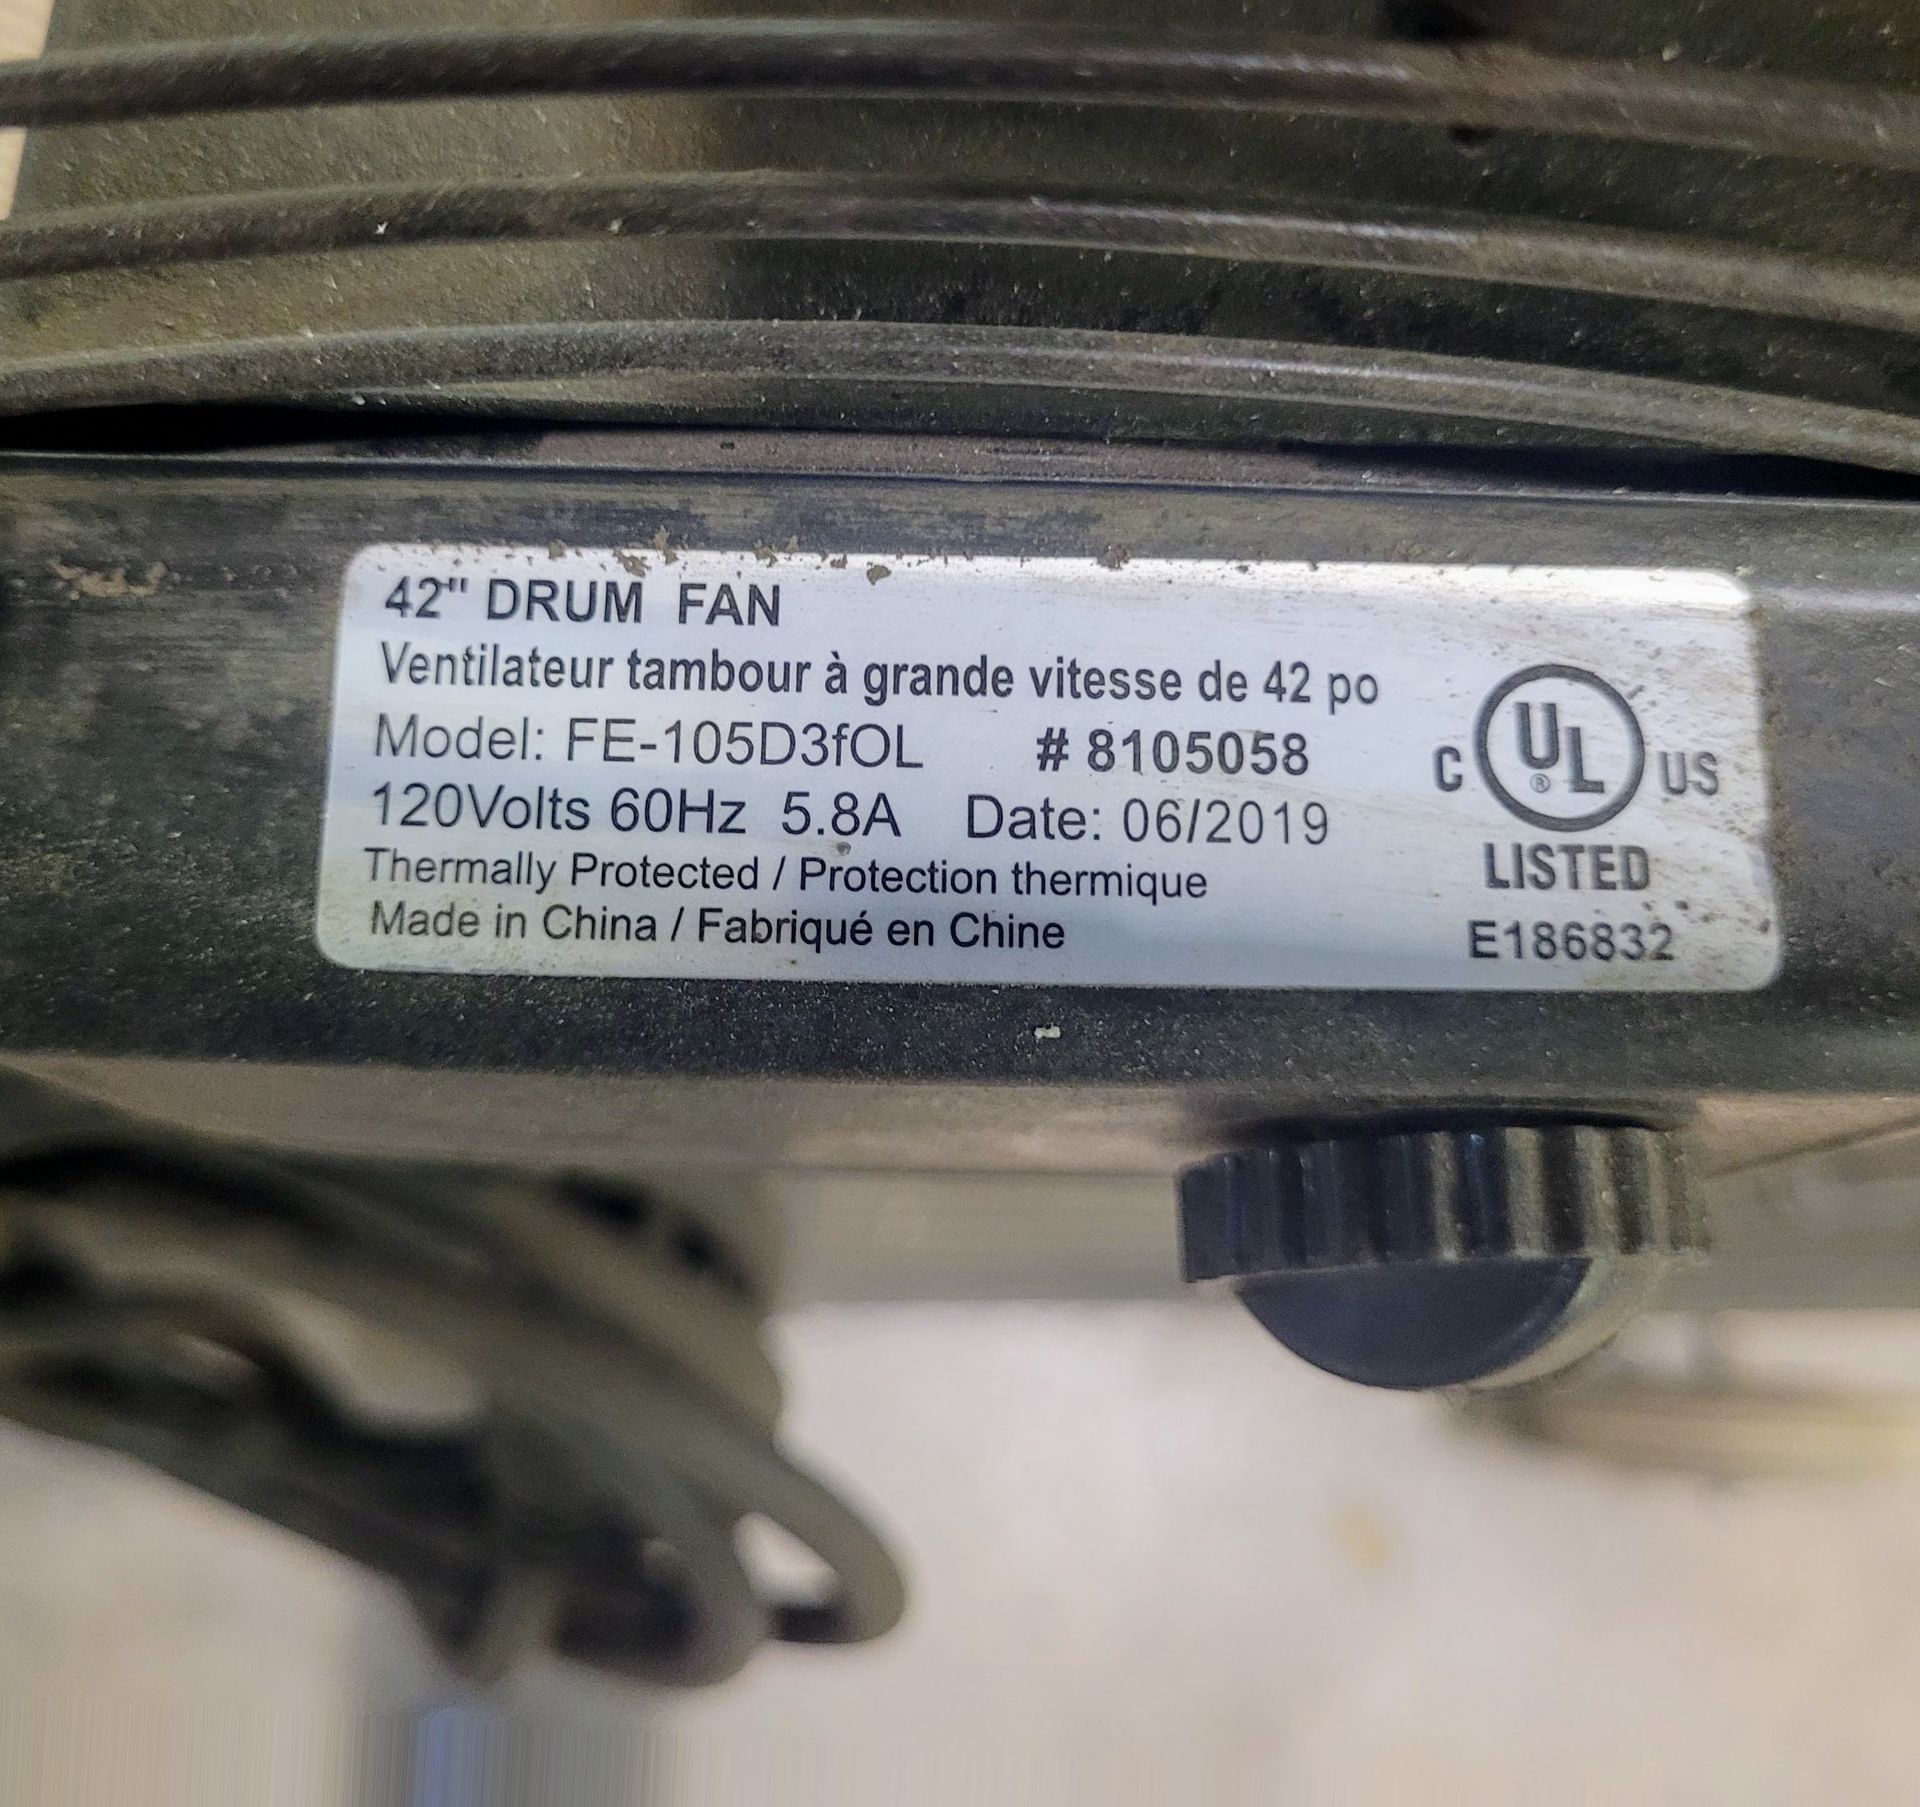 LISTED 42" DRUM FAN - Image 2 of 2